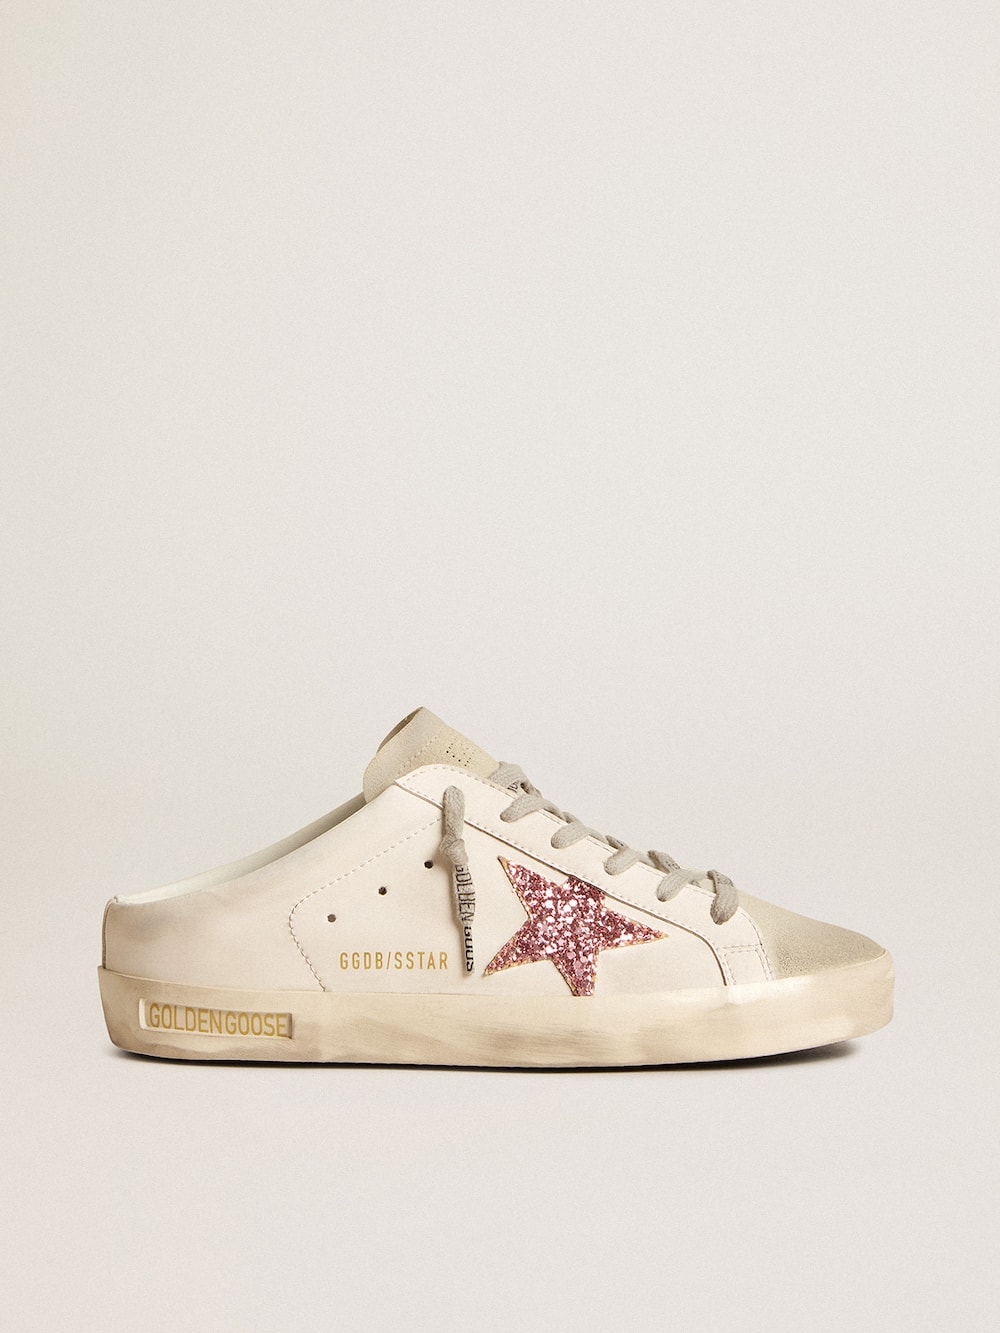 Golden Goose - Bio-based Super-Star Sabot with pink glitter star and suede toe in 